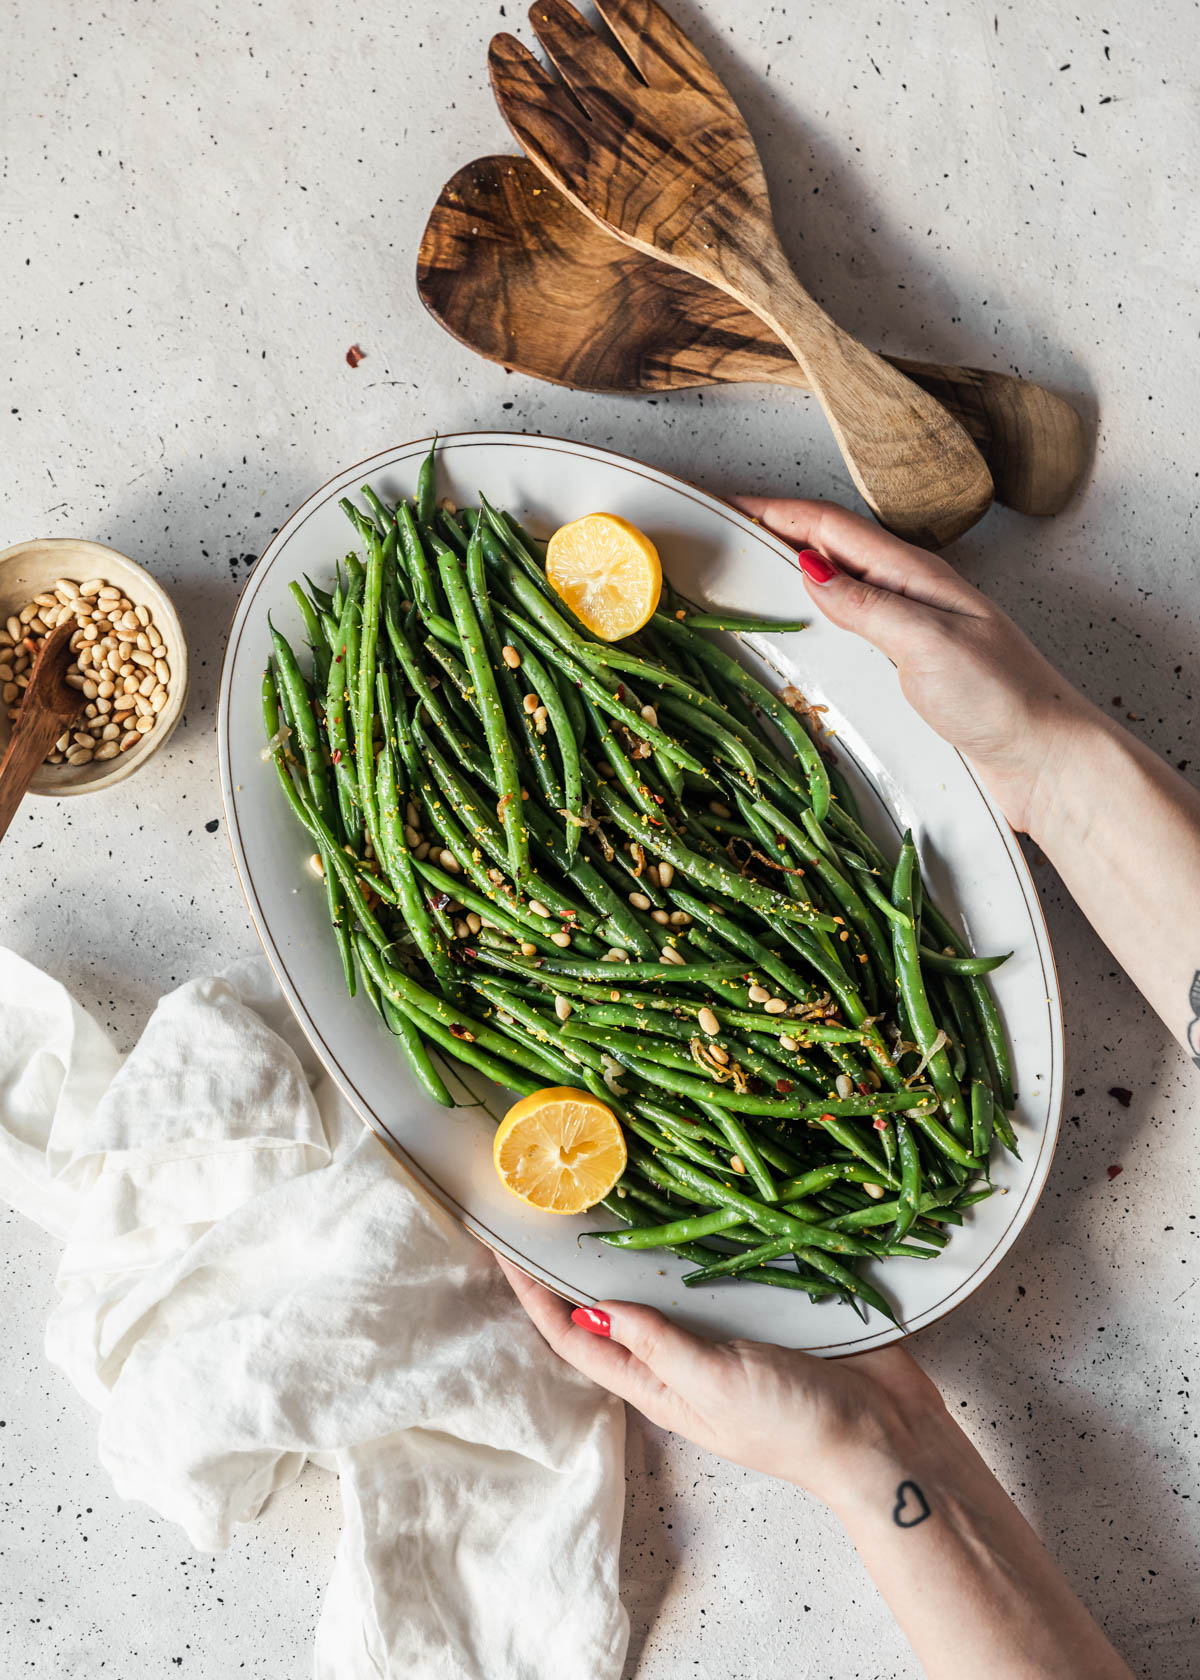 A woman's hands holding a white platter with lemony green beans over a white counter next to wood salad tossers and a bowl of pine nuts.